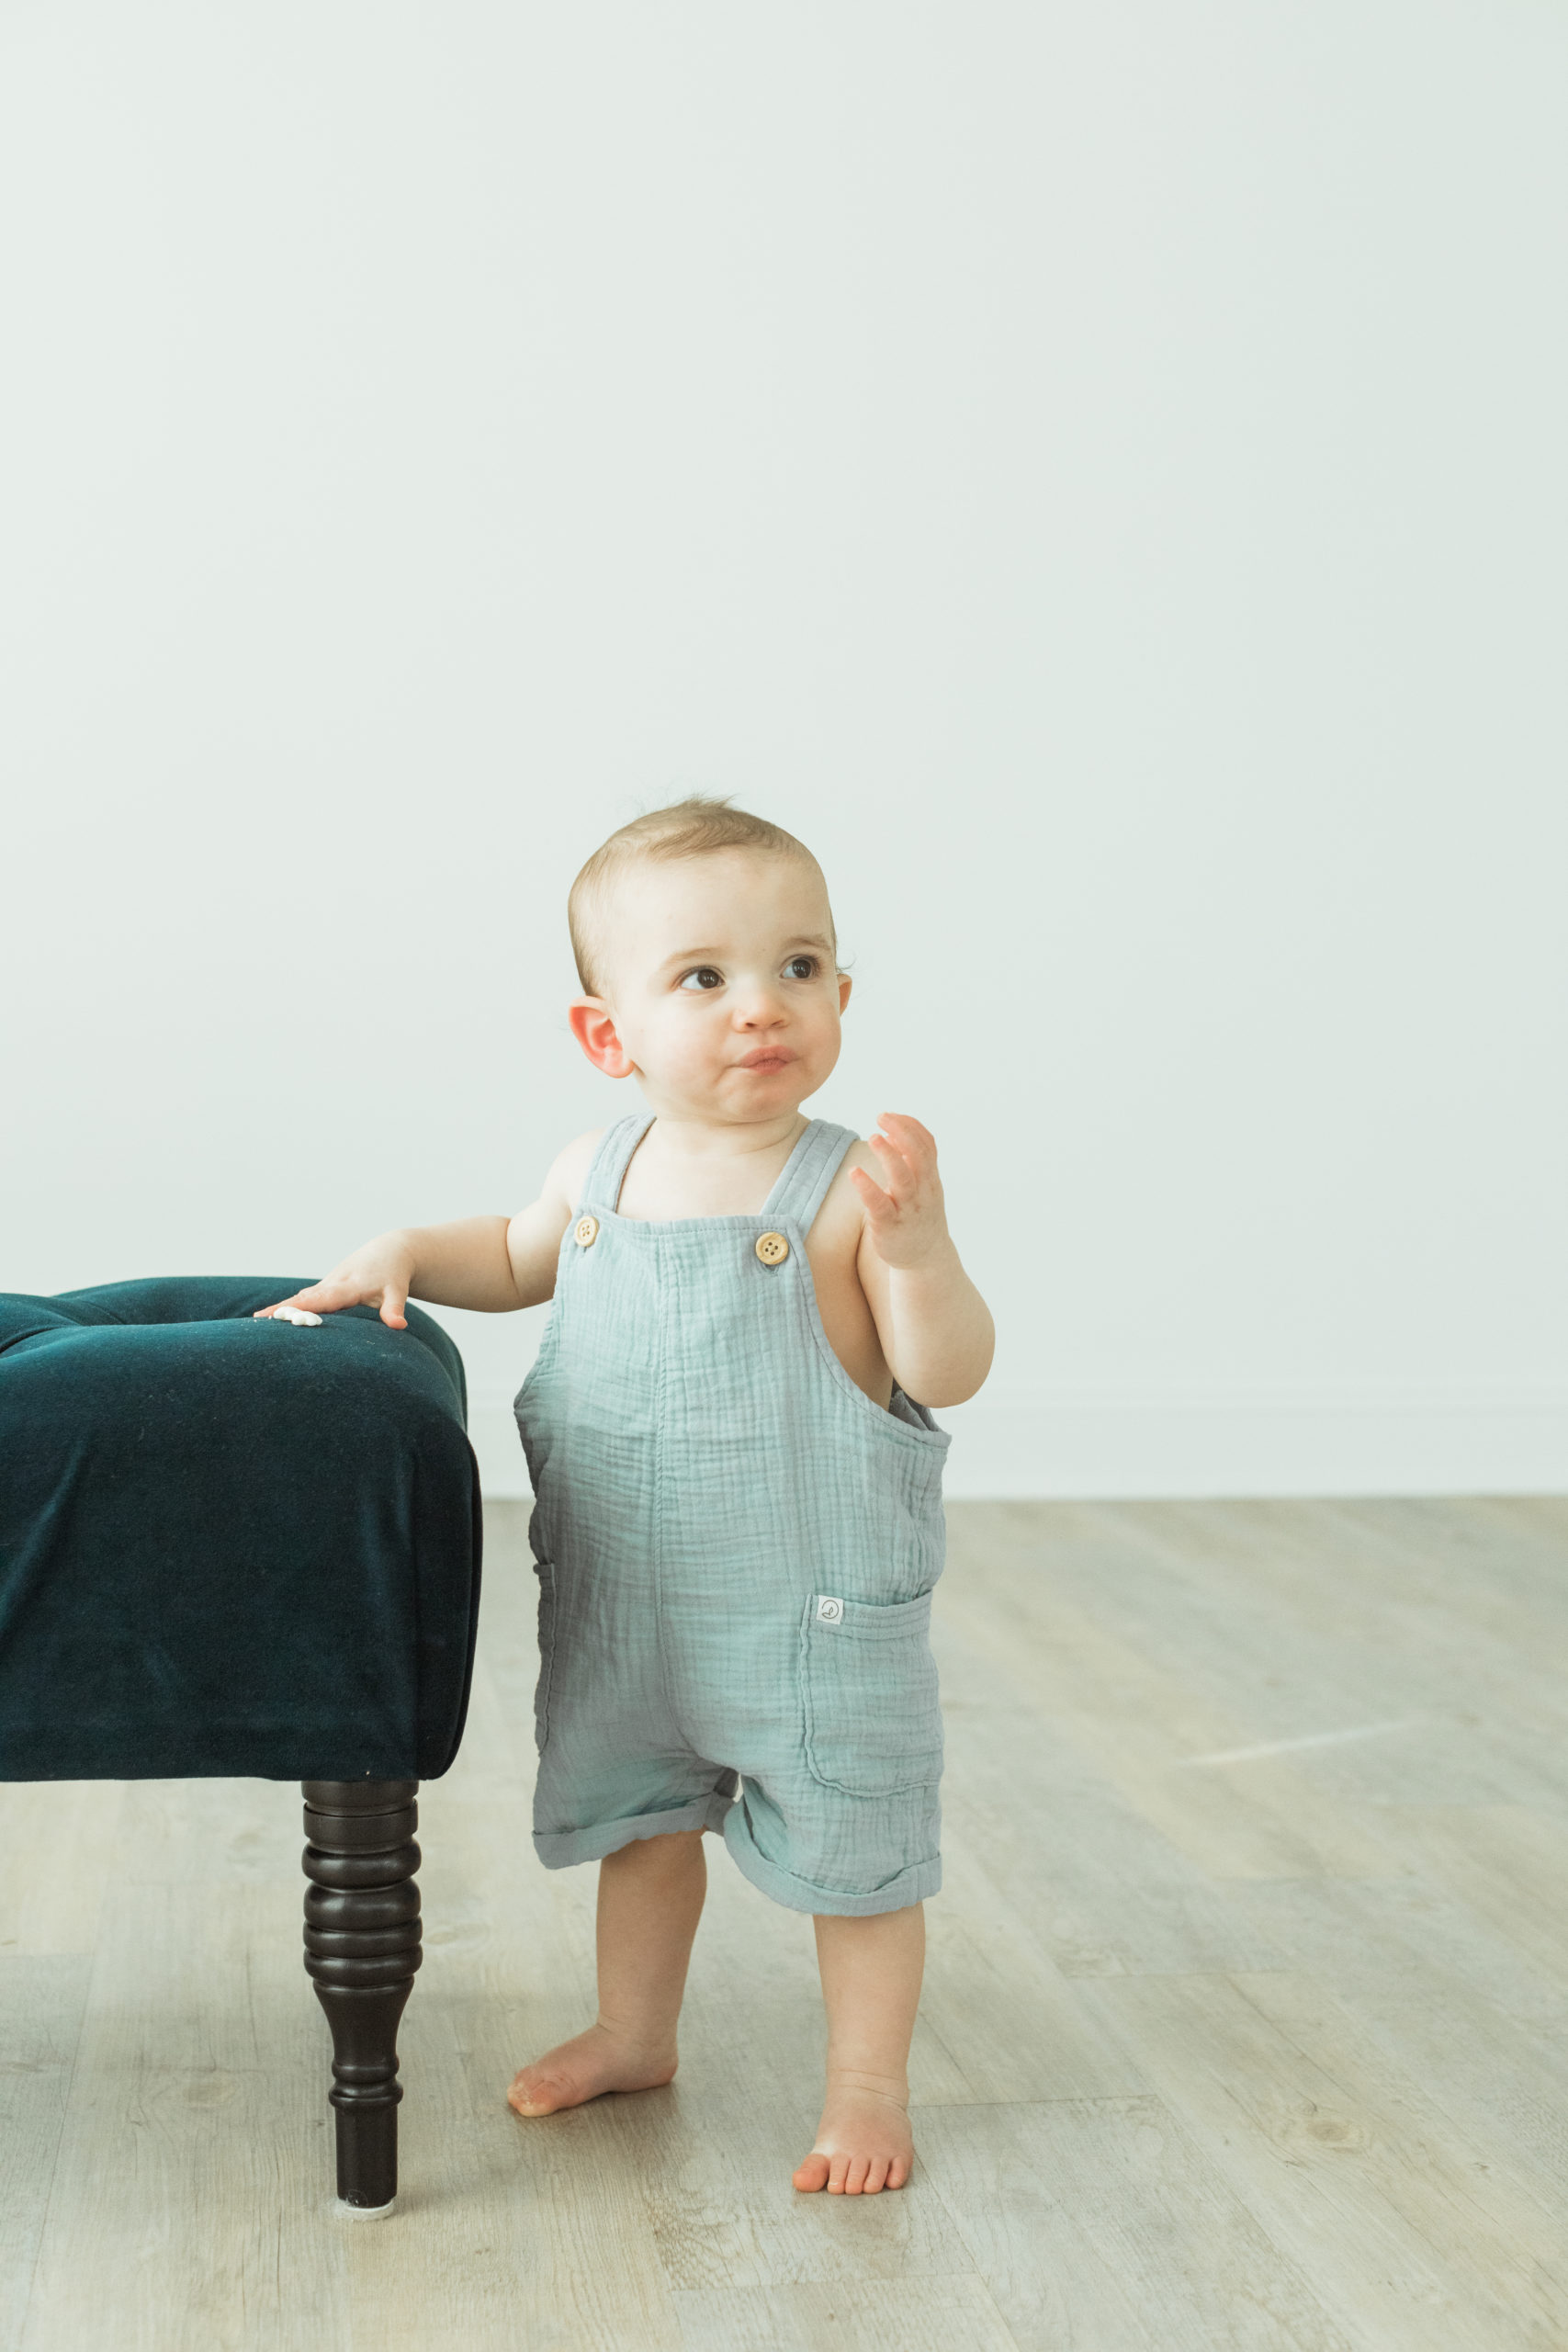 Photo of 1 year old baby boy standing near an emerald green velvet chair. Little boy's hand is resting in the chair while he's looking away from camera to the side. Baby boy barefoot in baby blue linen sleeveless overalls. Cute baby smile.